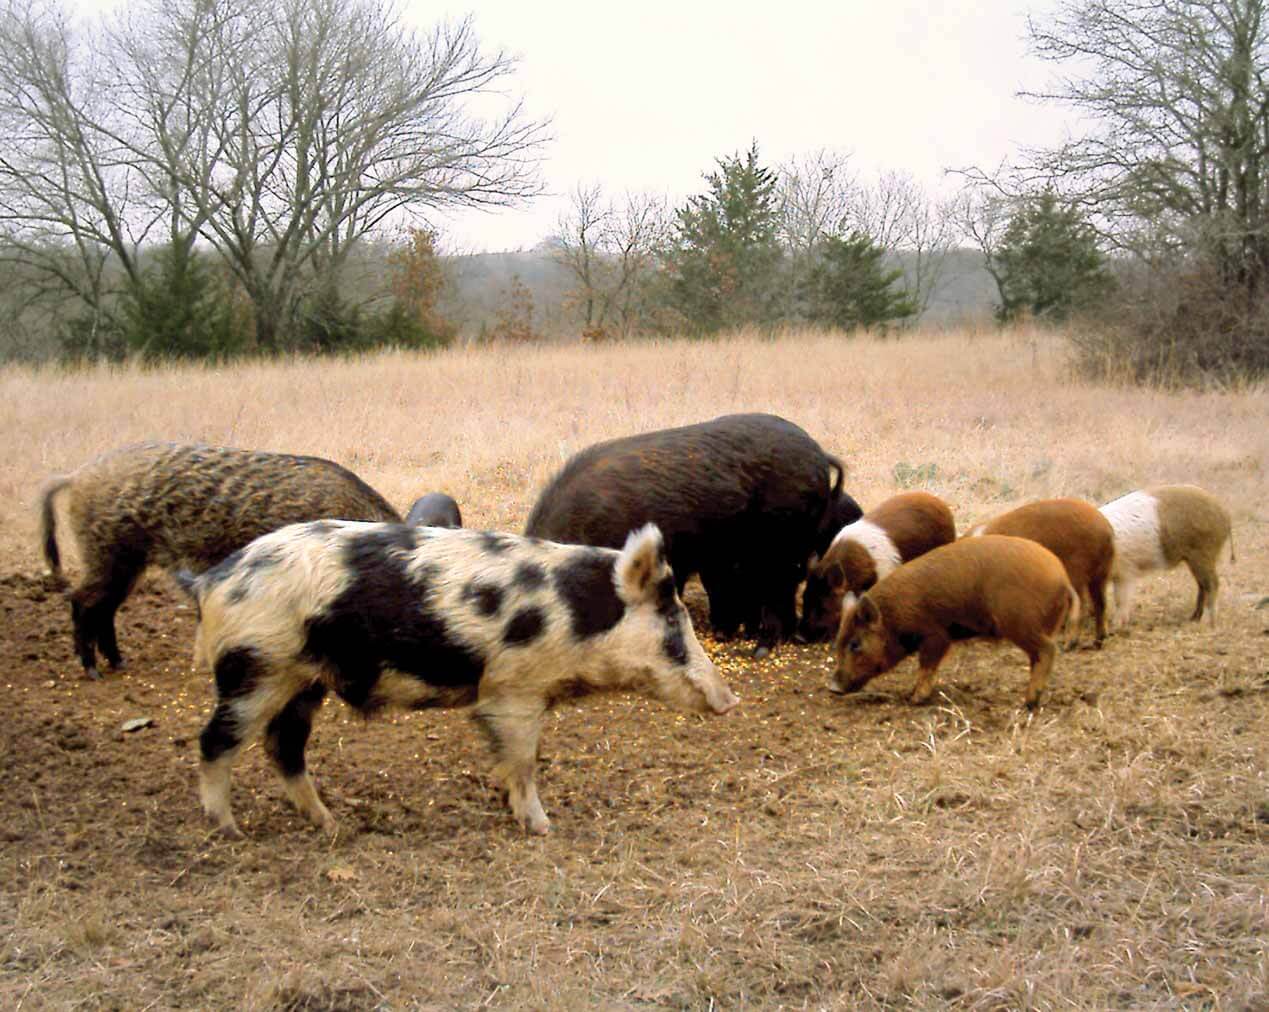 Hogs with Mixed Coats